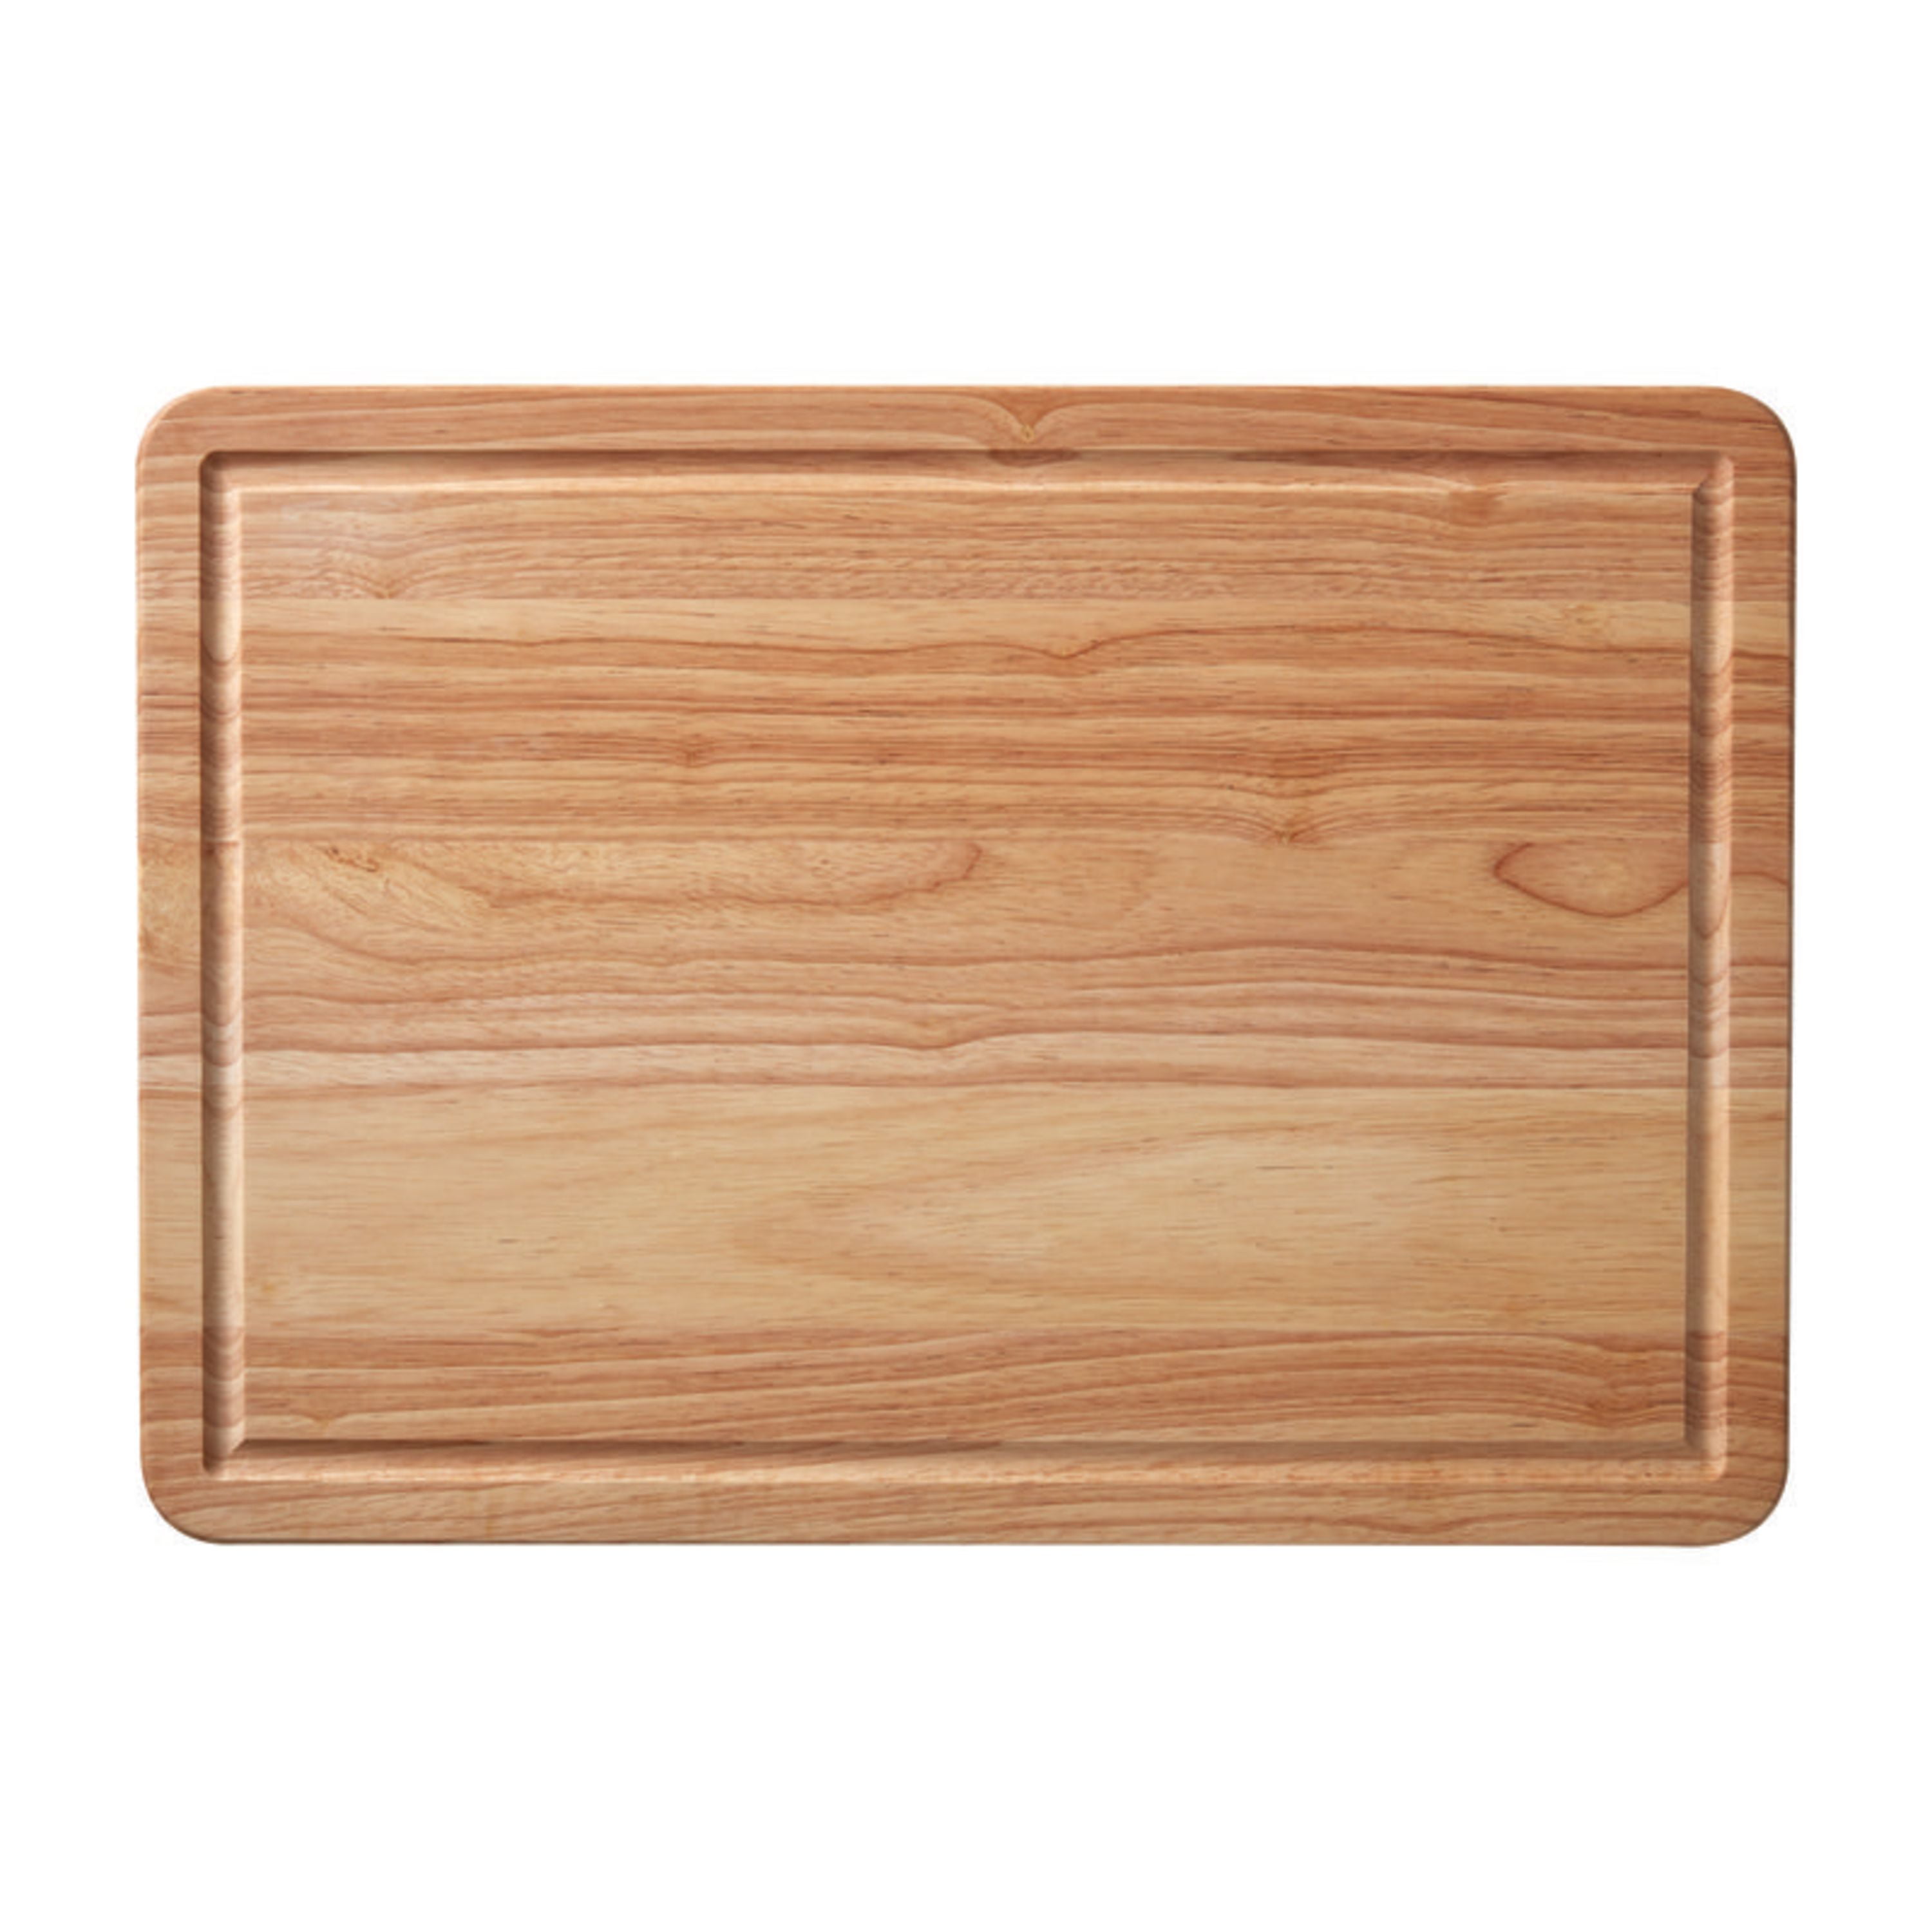 2 x  Wooden board with handle rectangle reduced price  18 x 40 cm 